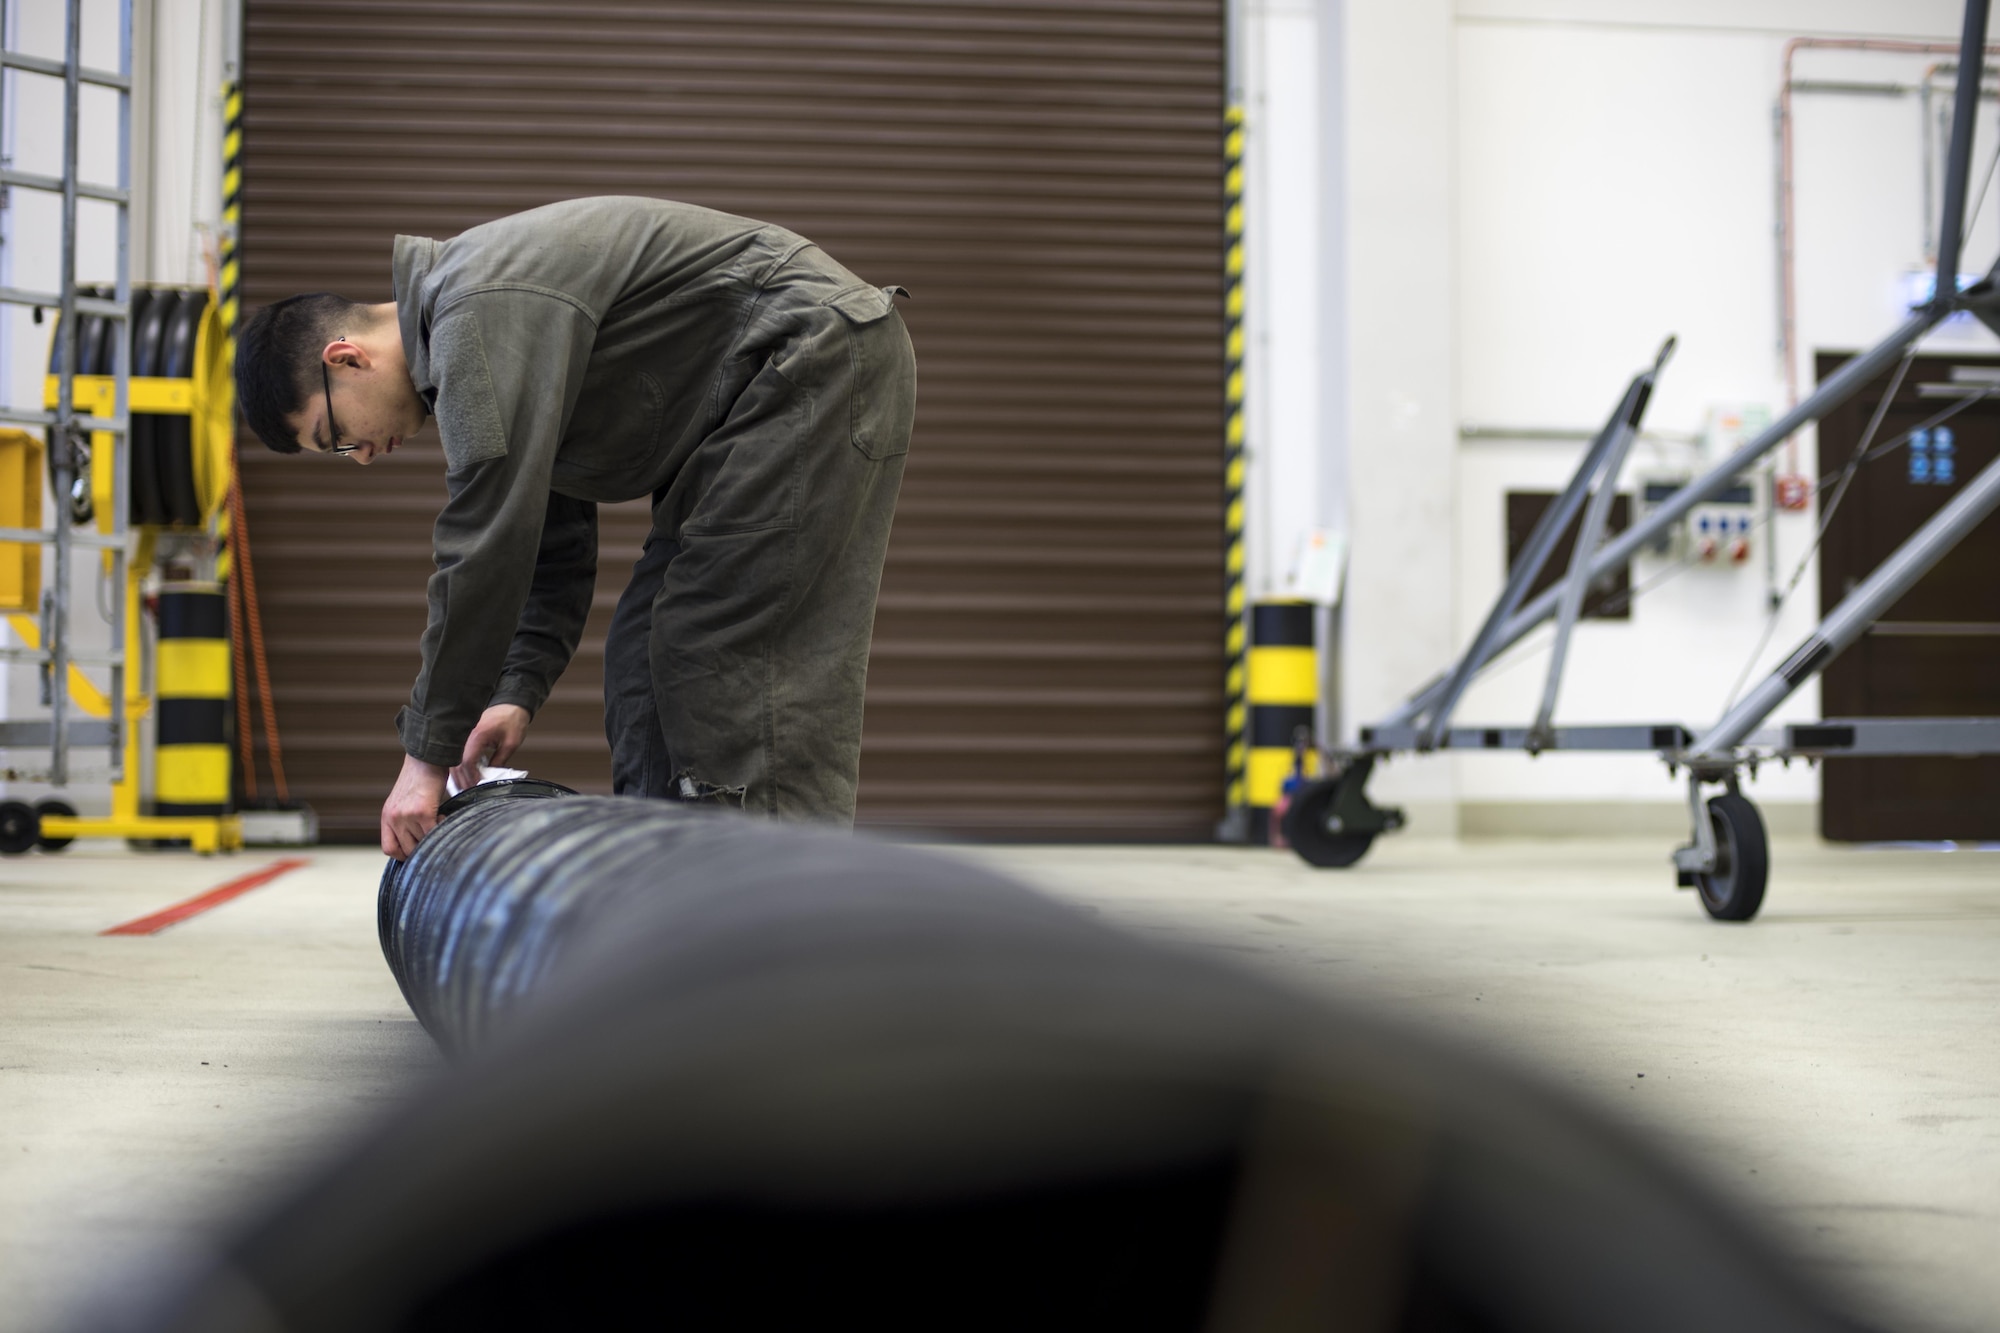 U.S. Air Force Airman 1st Class John Cantu, 86th Maintenance Squadron Aerospace Ground Equipment apprentice, cleans an air duct at the AGE facility on Ramstein Air Base, Germany, Oct. 25, 2017. Part of the inspections process, AGE technicians are required to clean the equipment to ensure they work properly and last longer. (U.S. Air Force photo by Senior Airman Devin Boyer)